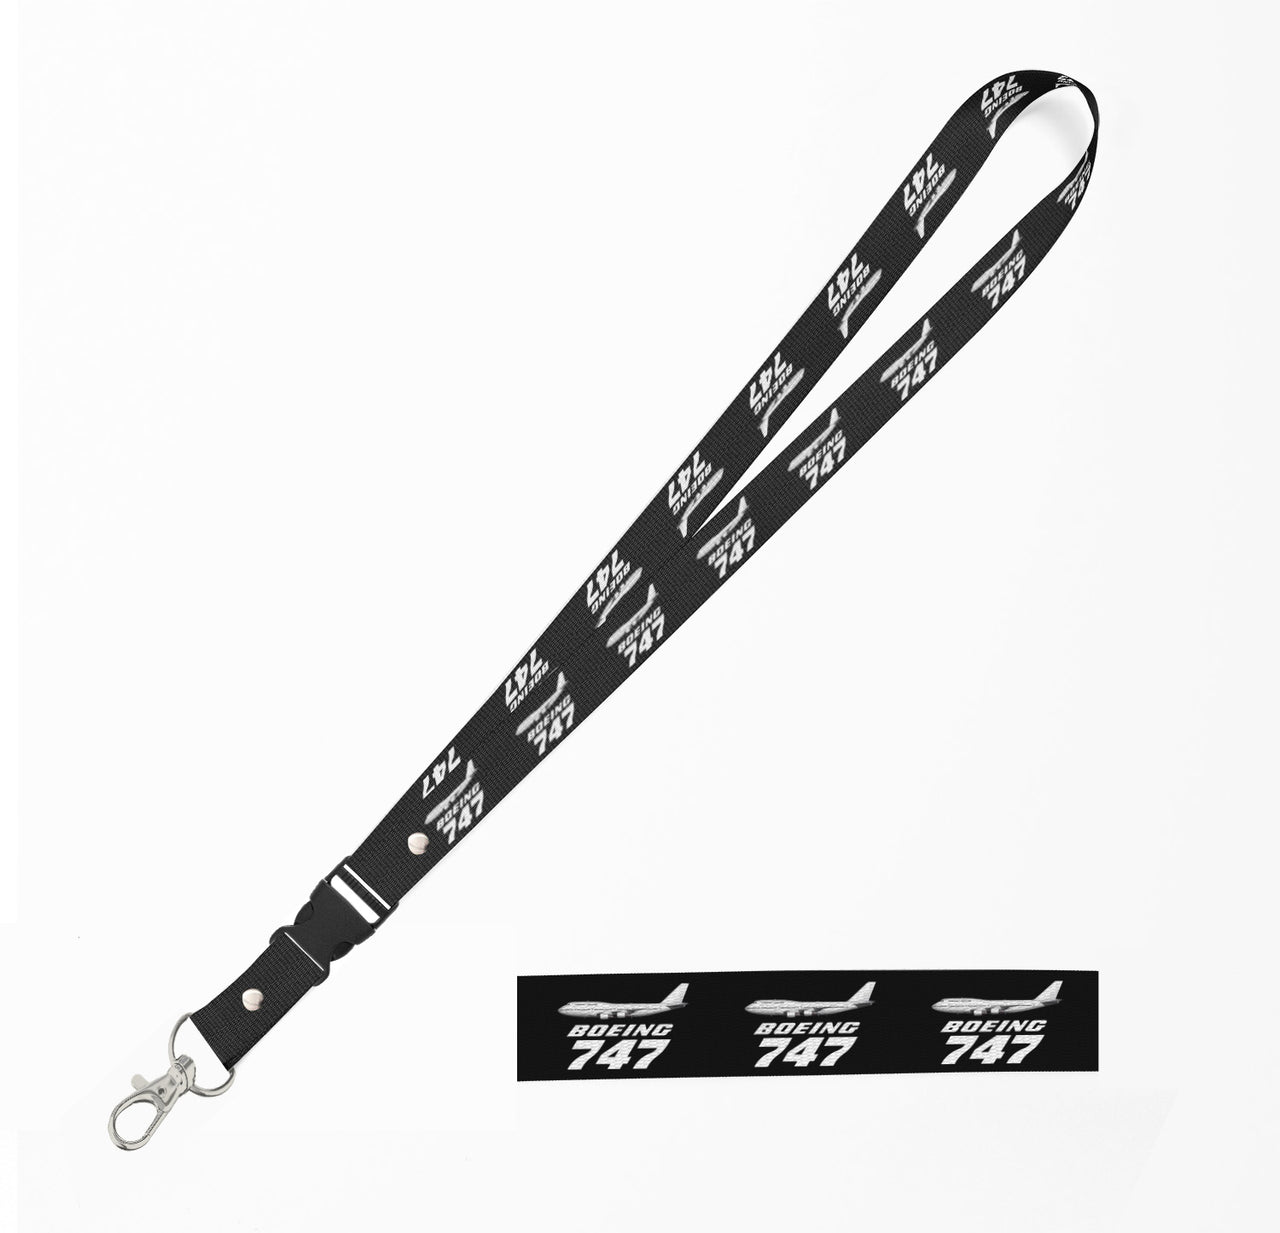 The Boeing 747 Designed Detachable Lanyard & ID Holders